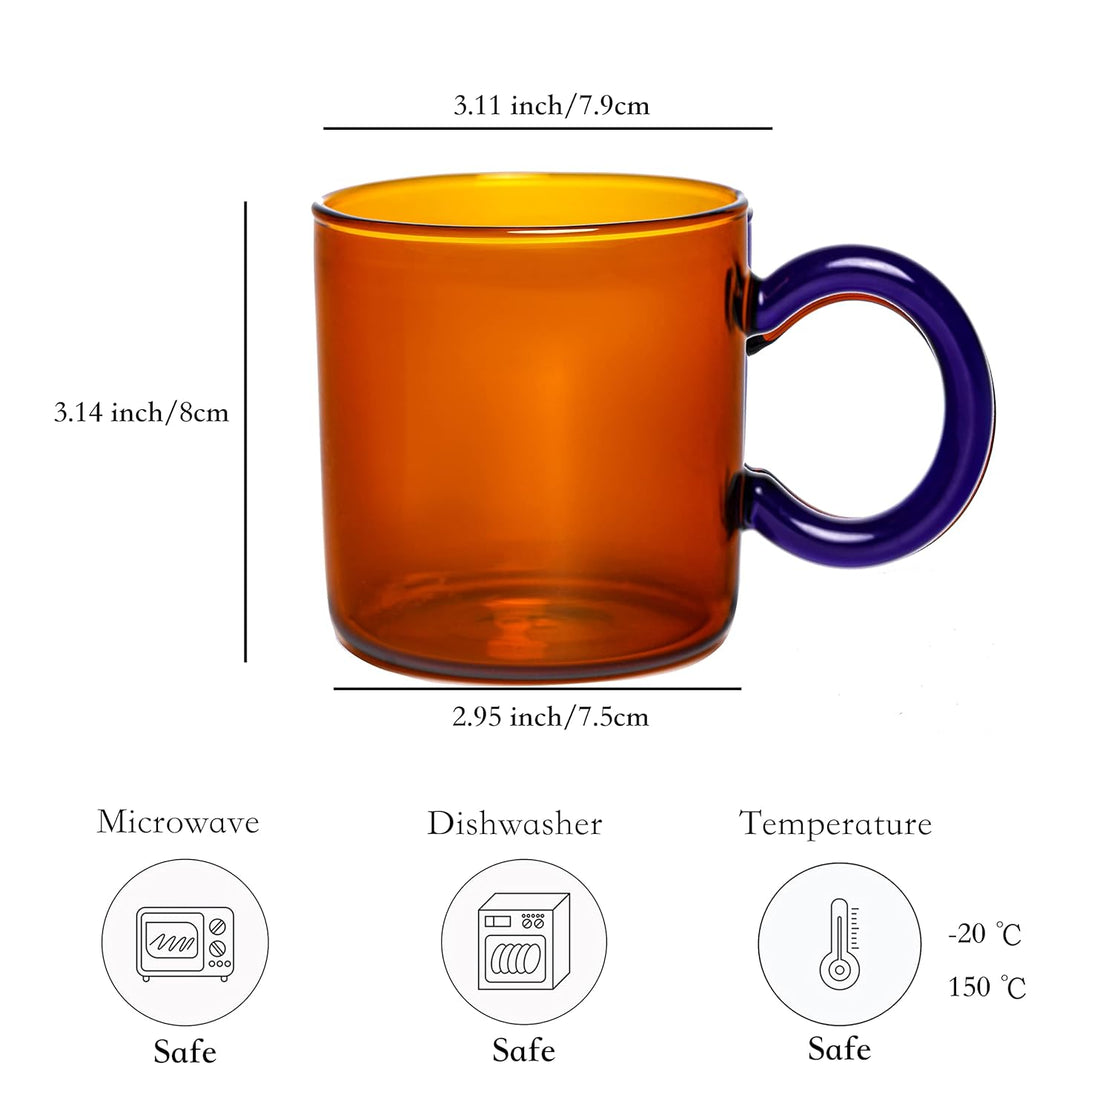 AryaElla 10oz Glass Coffee Mug, Amber Clear Cup with Handle for Hot/Cold Coffee Tea Beverage,Wide Mouth Mug Perfect for Mocha Espresso Latte Cappuccino Chocolate Juice, Lead-Free Drinking Glassware